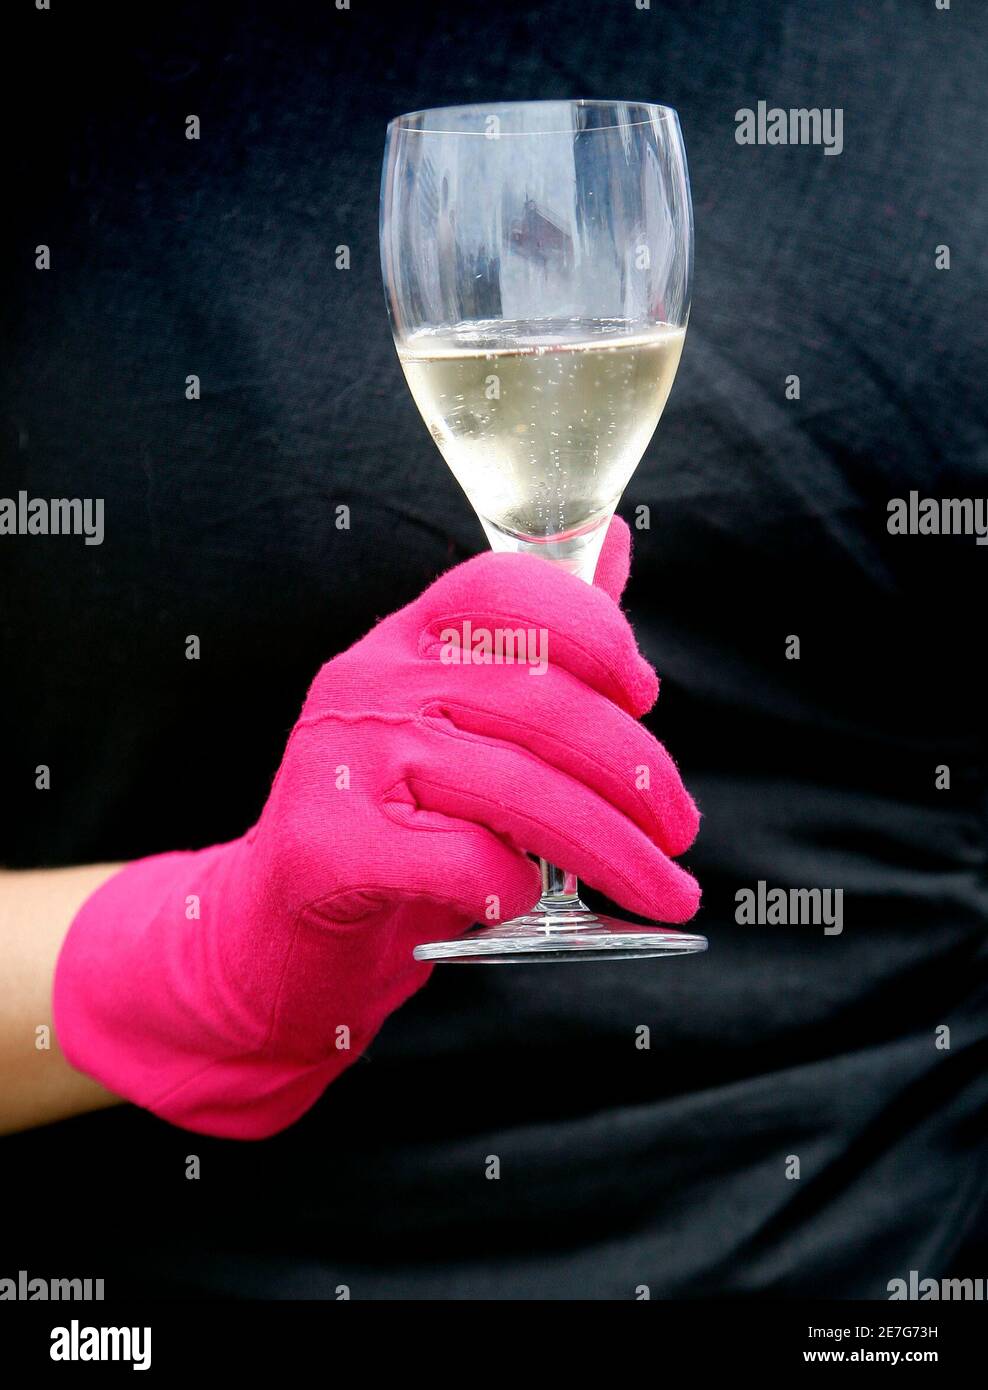 A woman holds a glass of champagne before the start of the first race of the Epsom Derby Festival at Epsom Downs in Surrey, southern England, June 6, 2008.    REUTERS/Darren Staples   (BRITAIN) Stock Photo